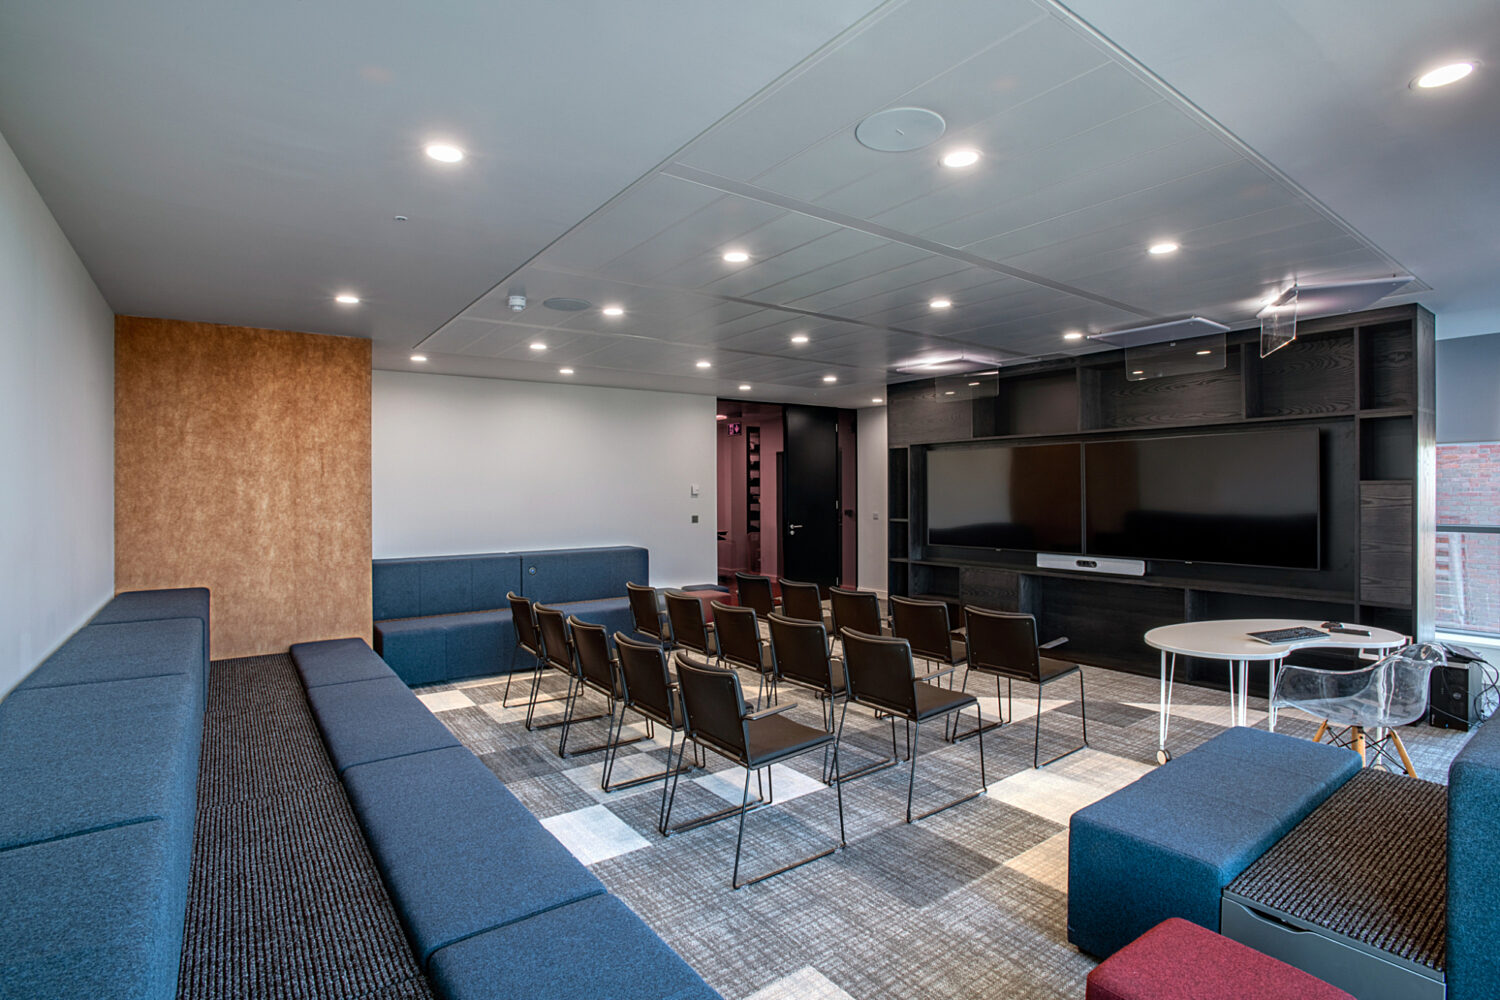 Tiered seating in a private auditorium space